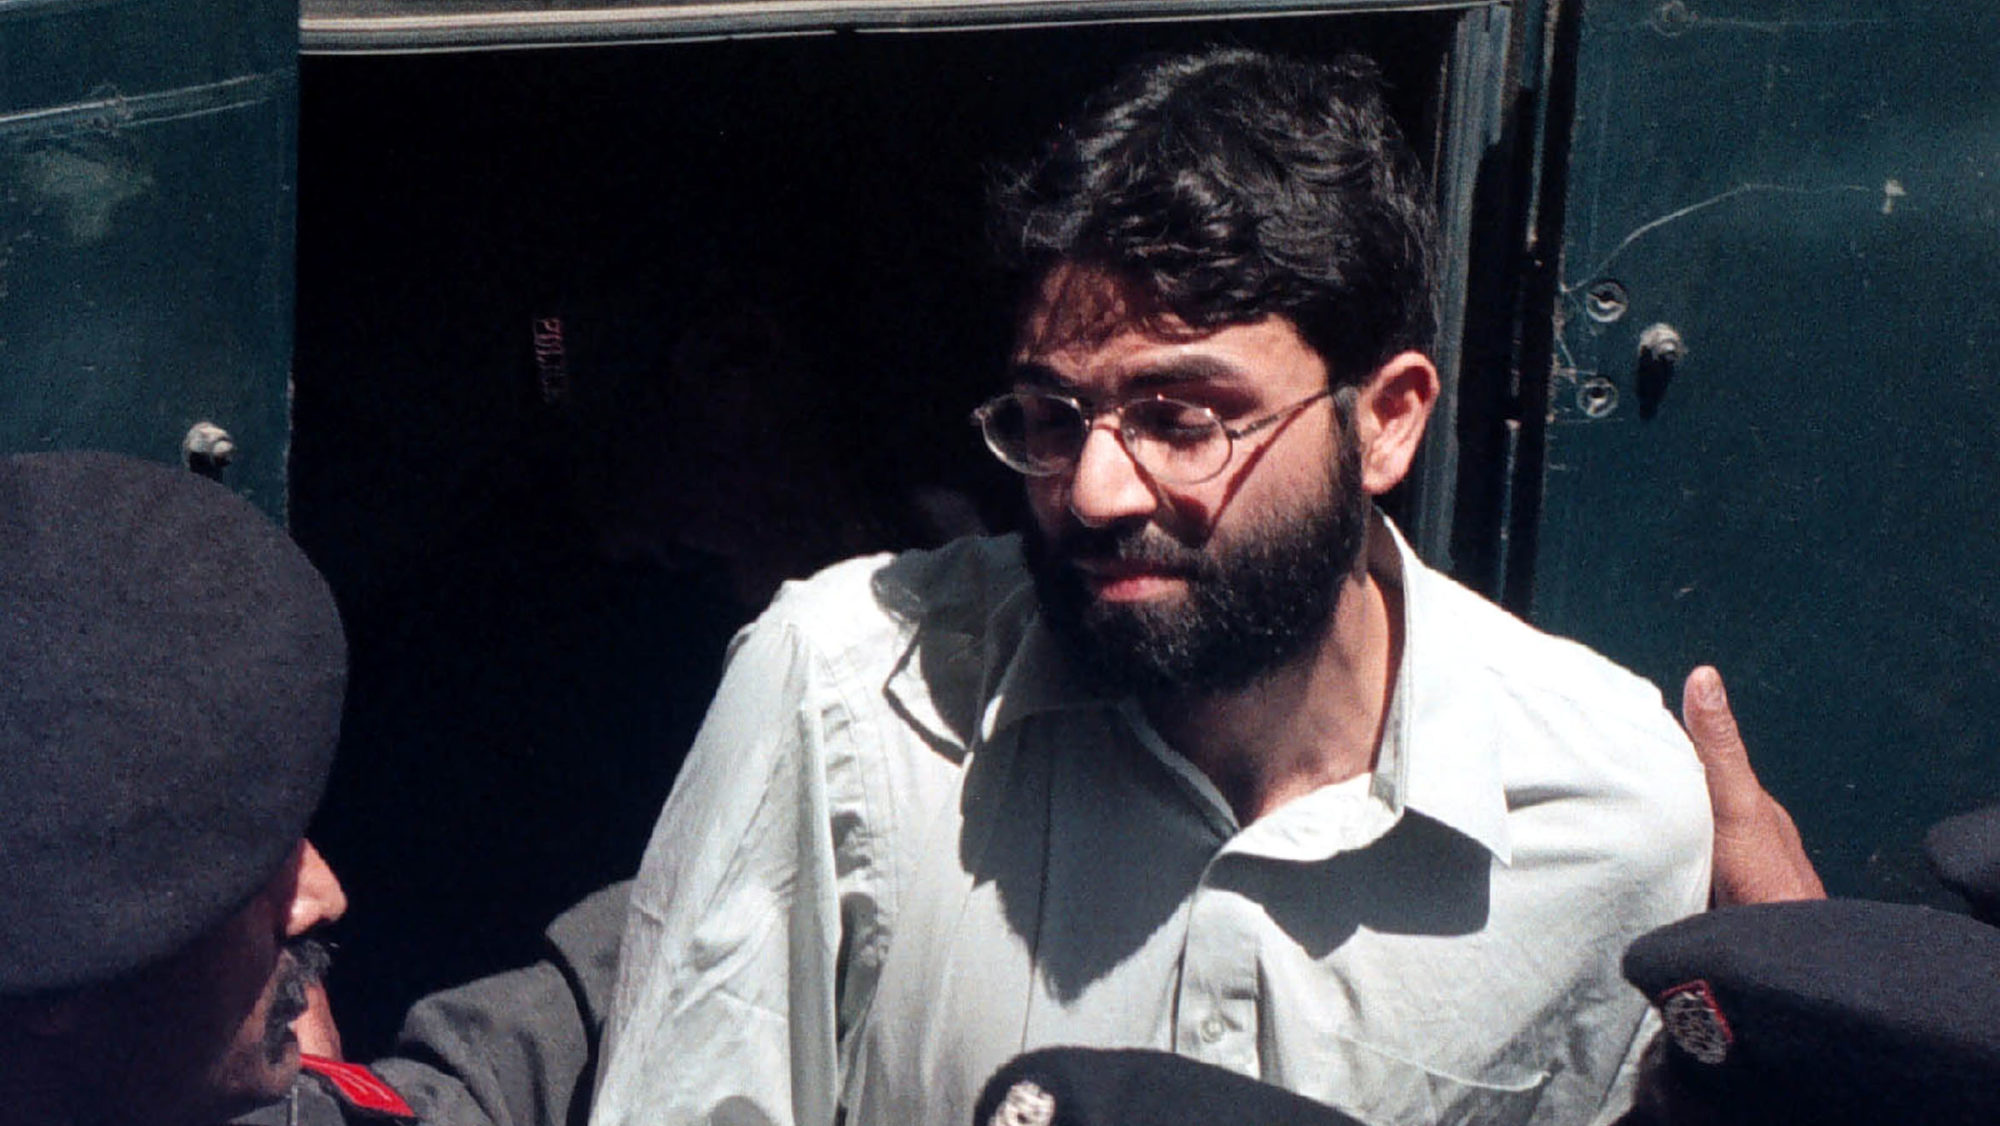 Alleged Killer of Daniel Pearl Ordered to Safe House